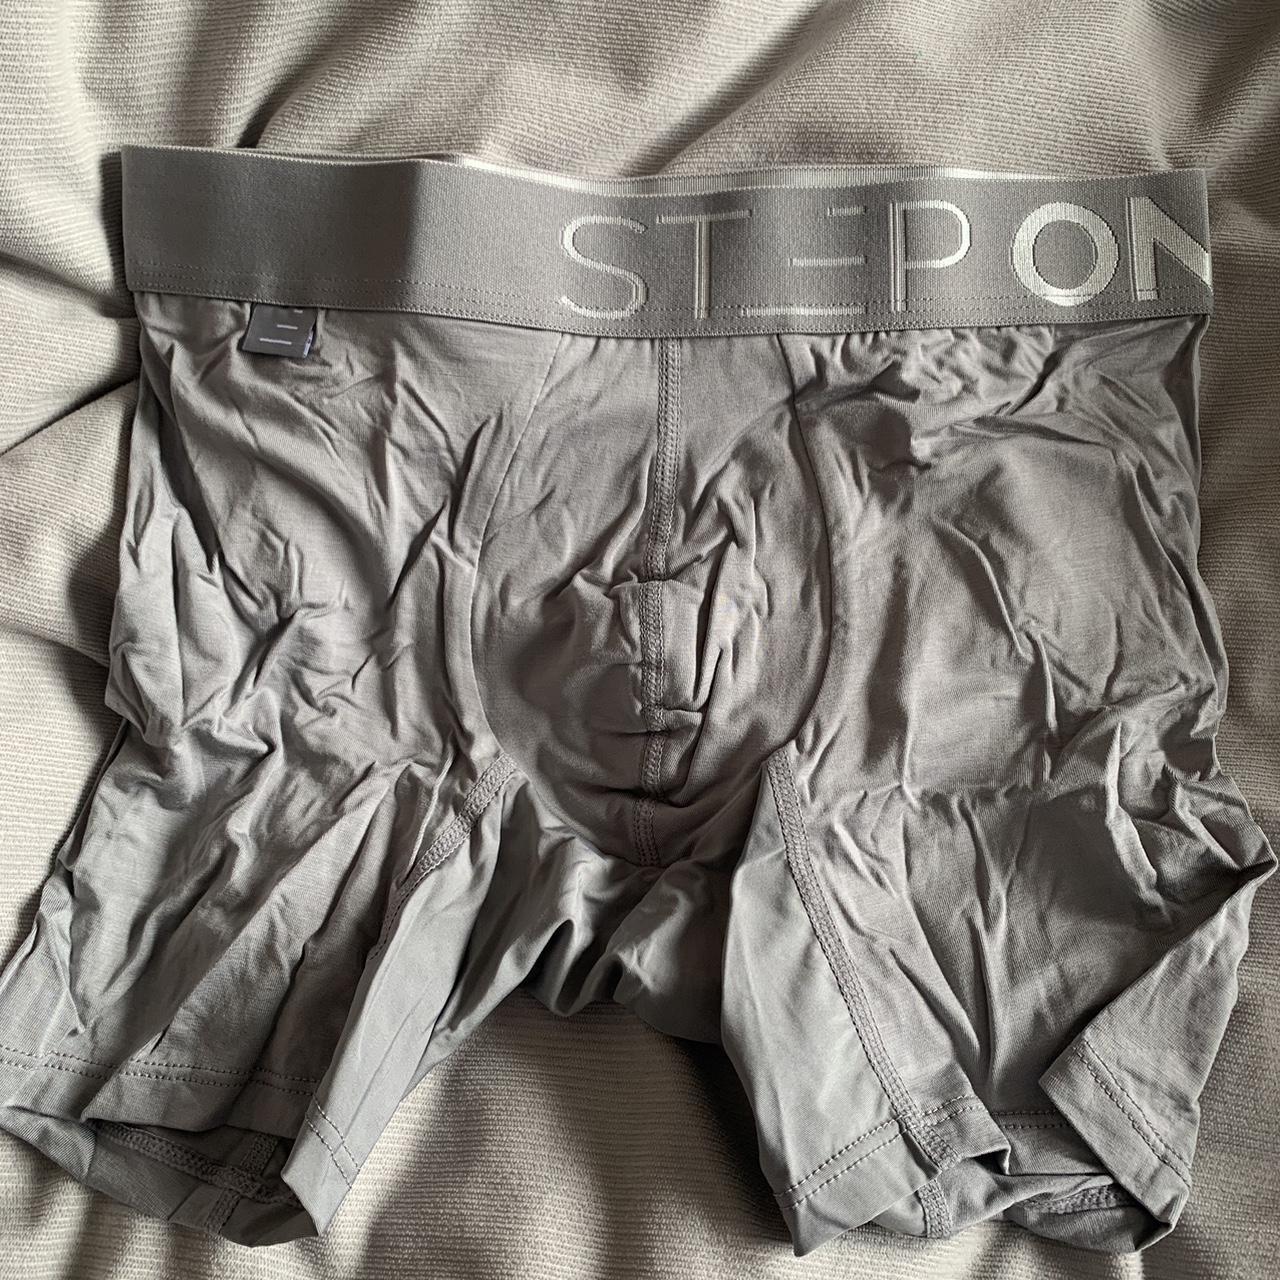 BRAND NEW Step one men's boxers Size S RRP - Depop